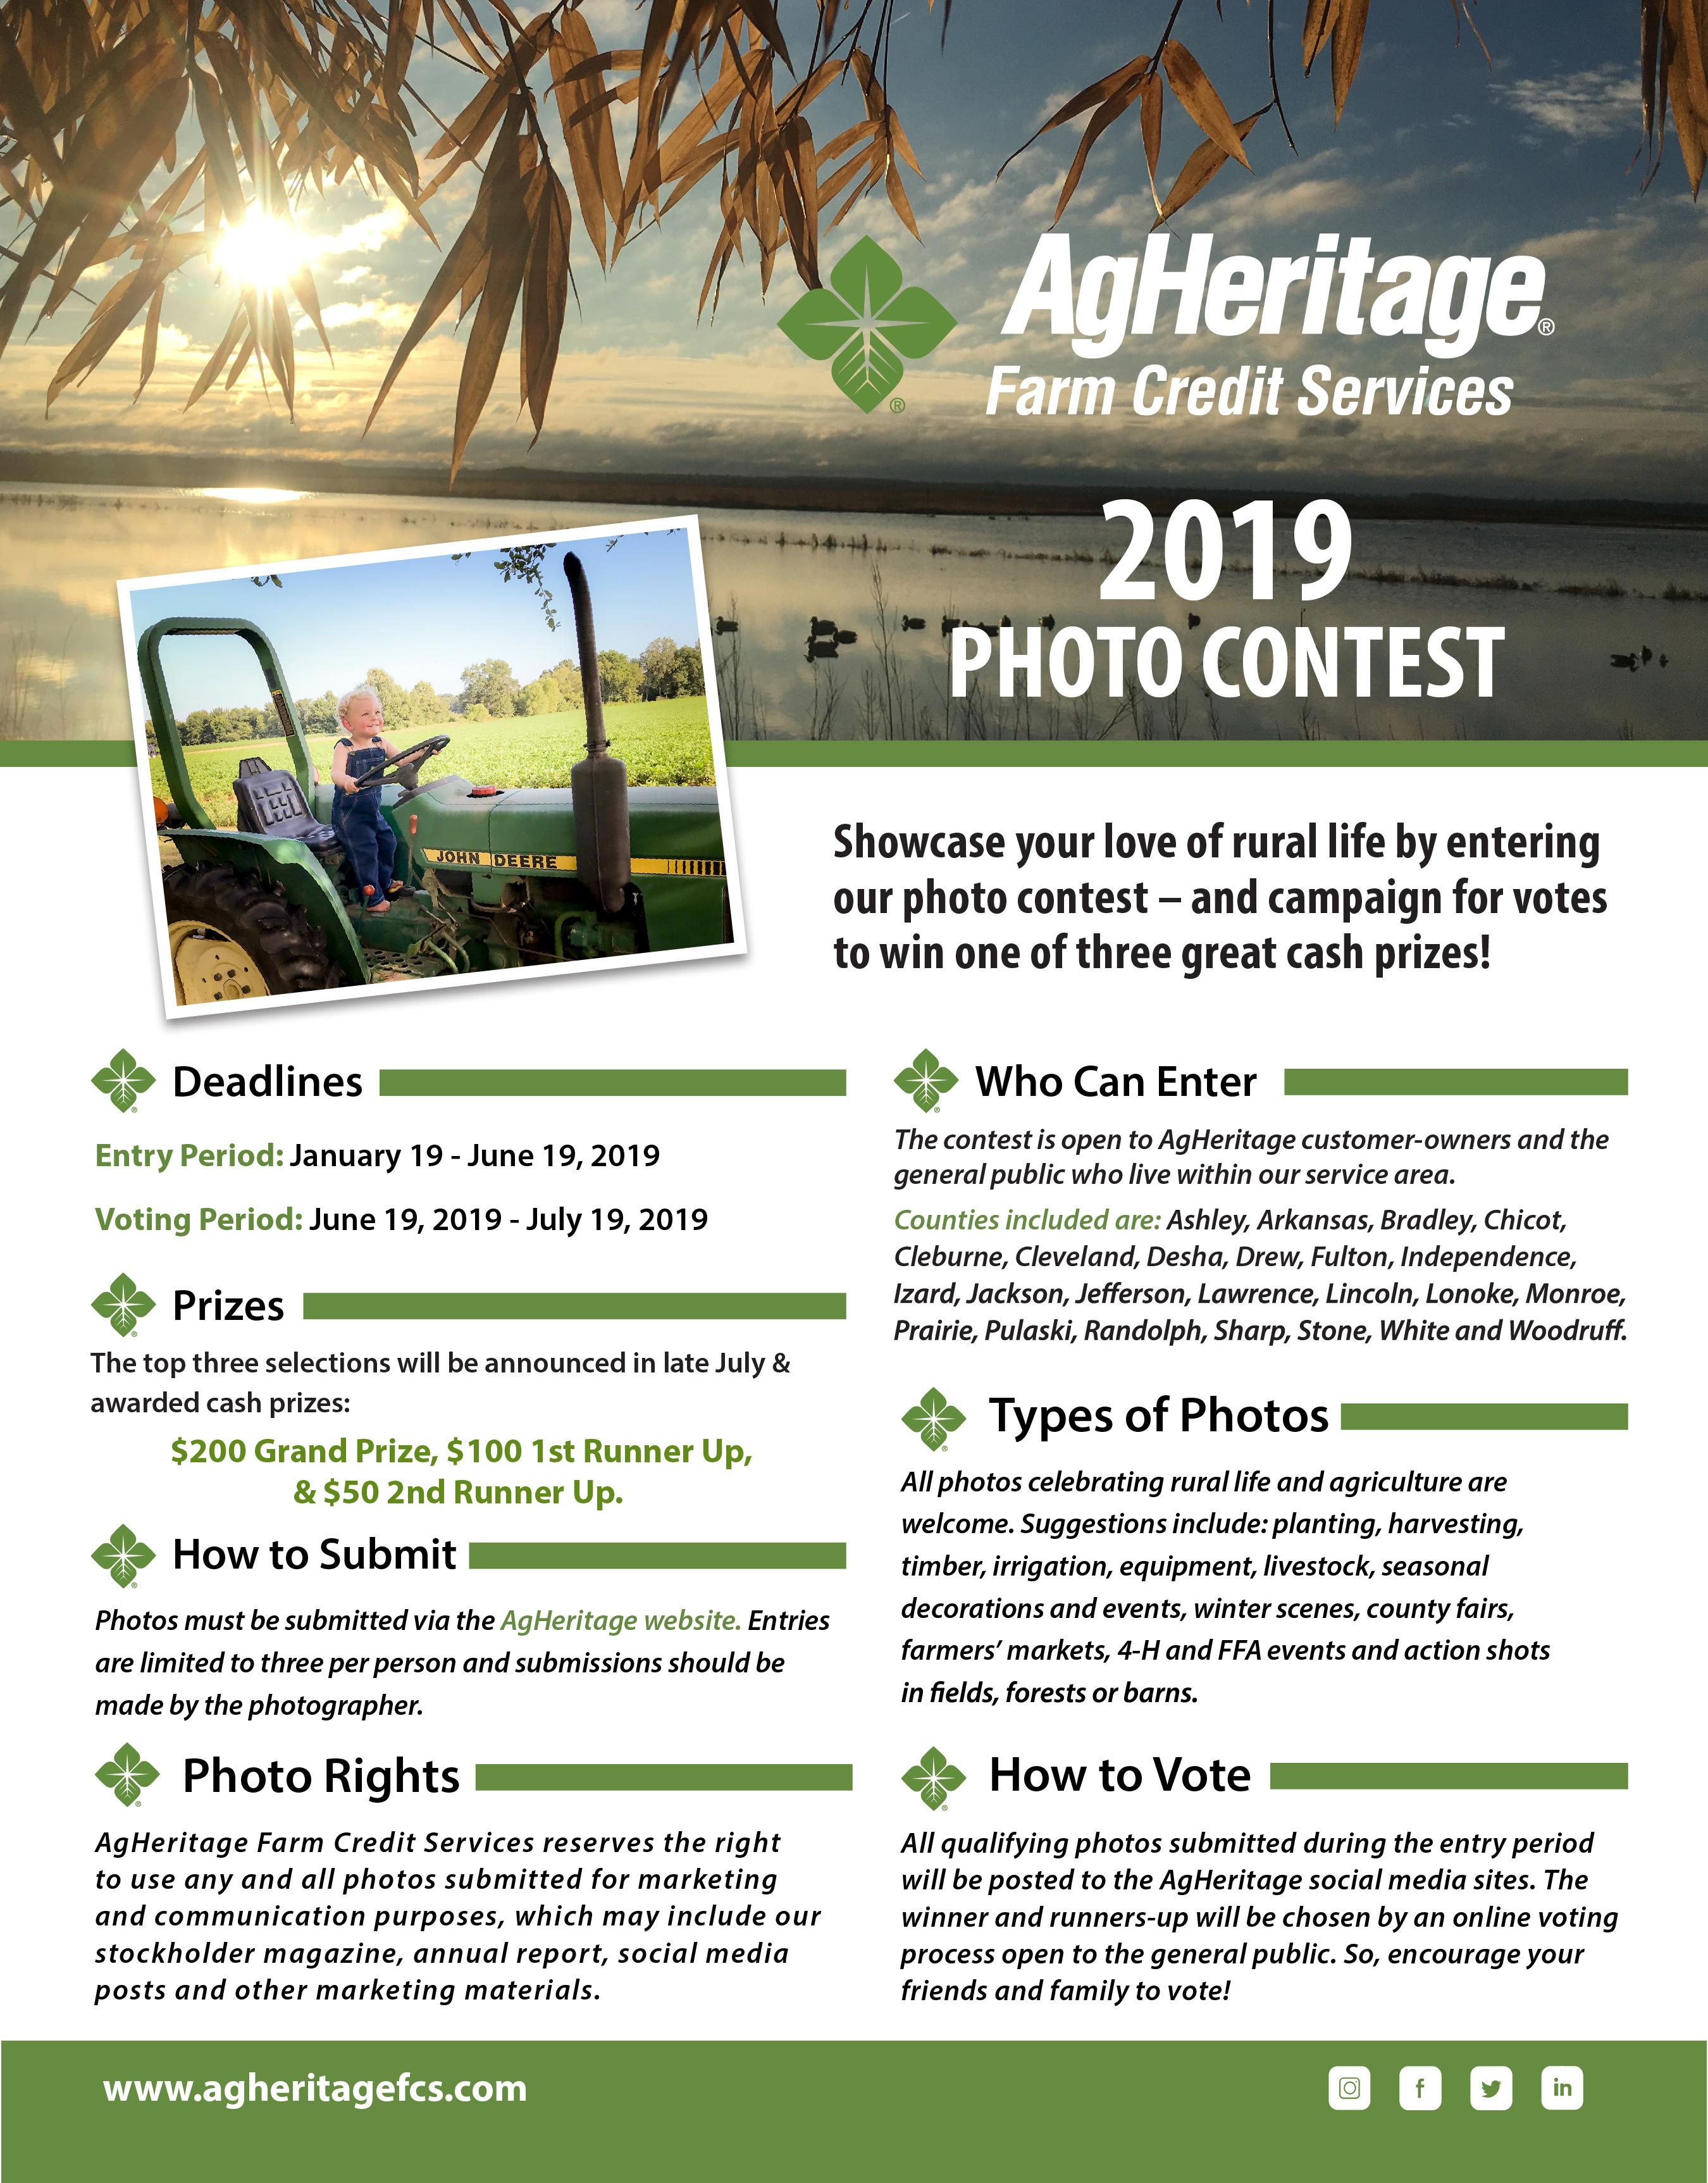 AgHeritage photo contest flyer.